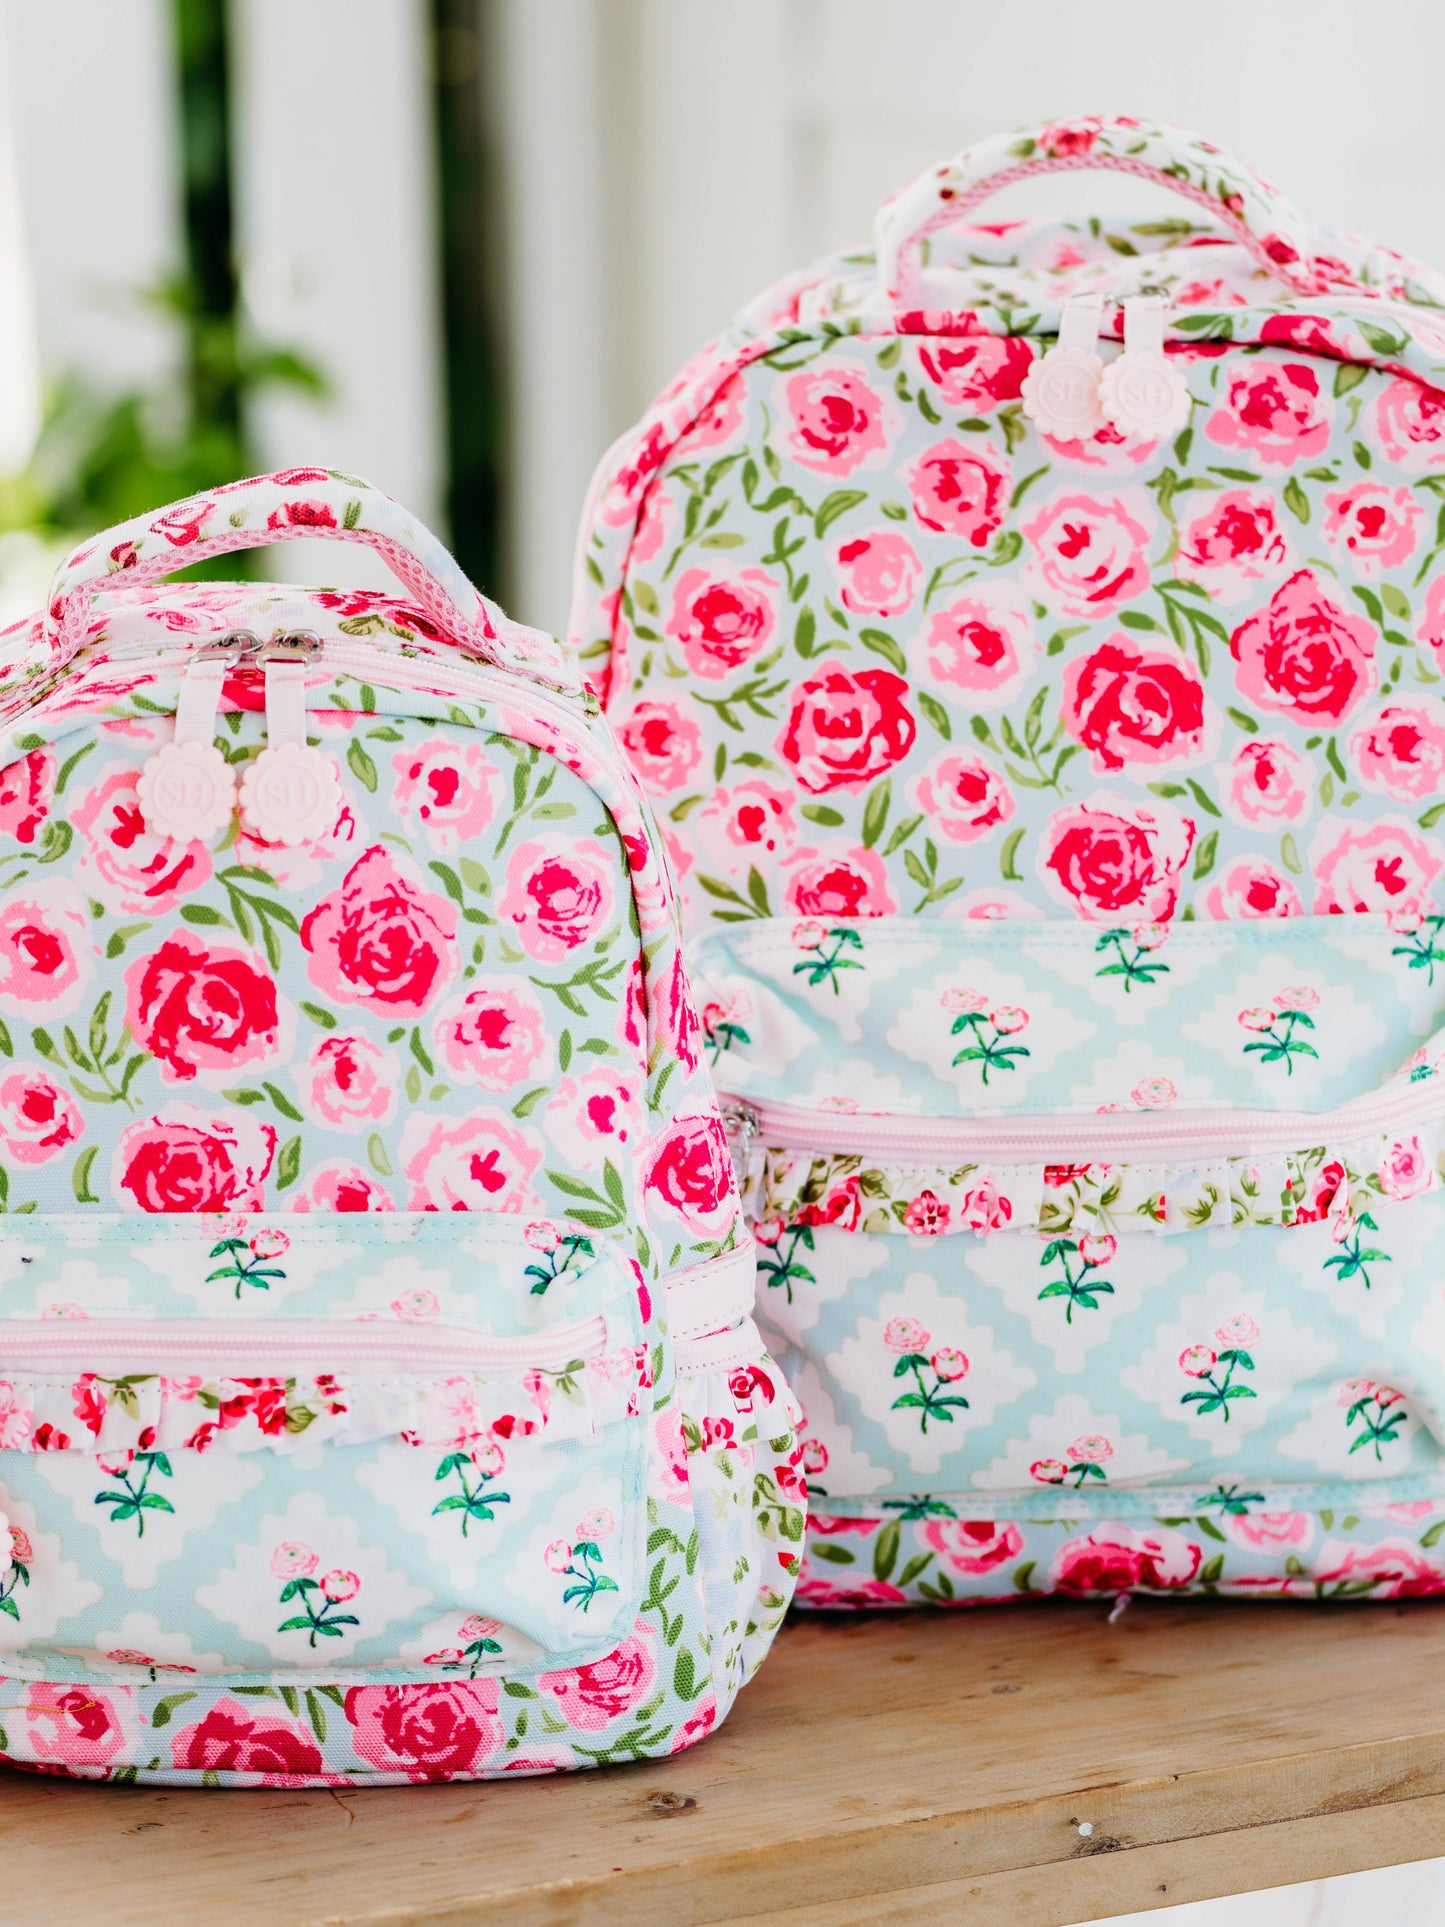 Ridley Backpack - Covered in Roses on Aqua